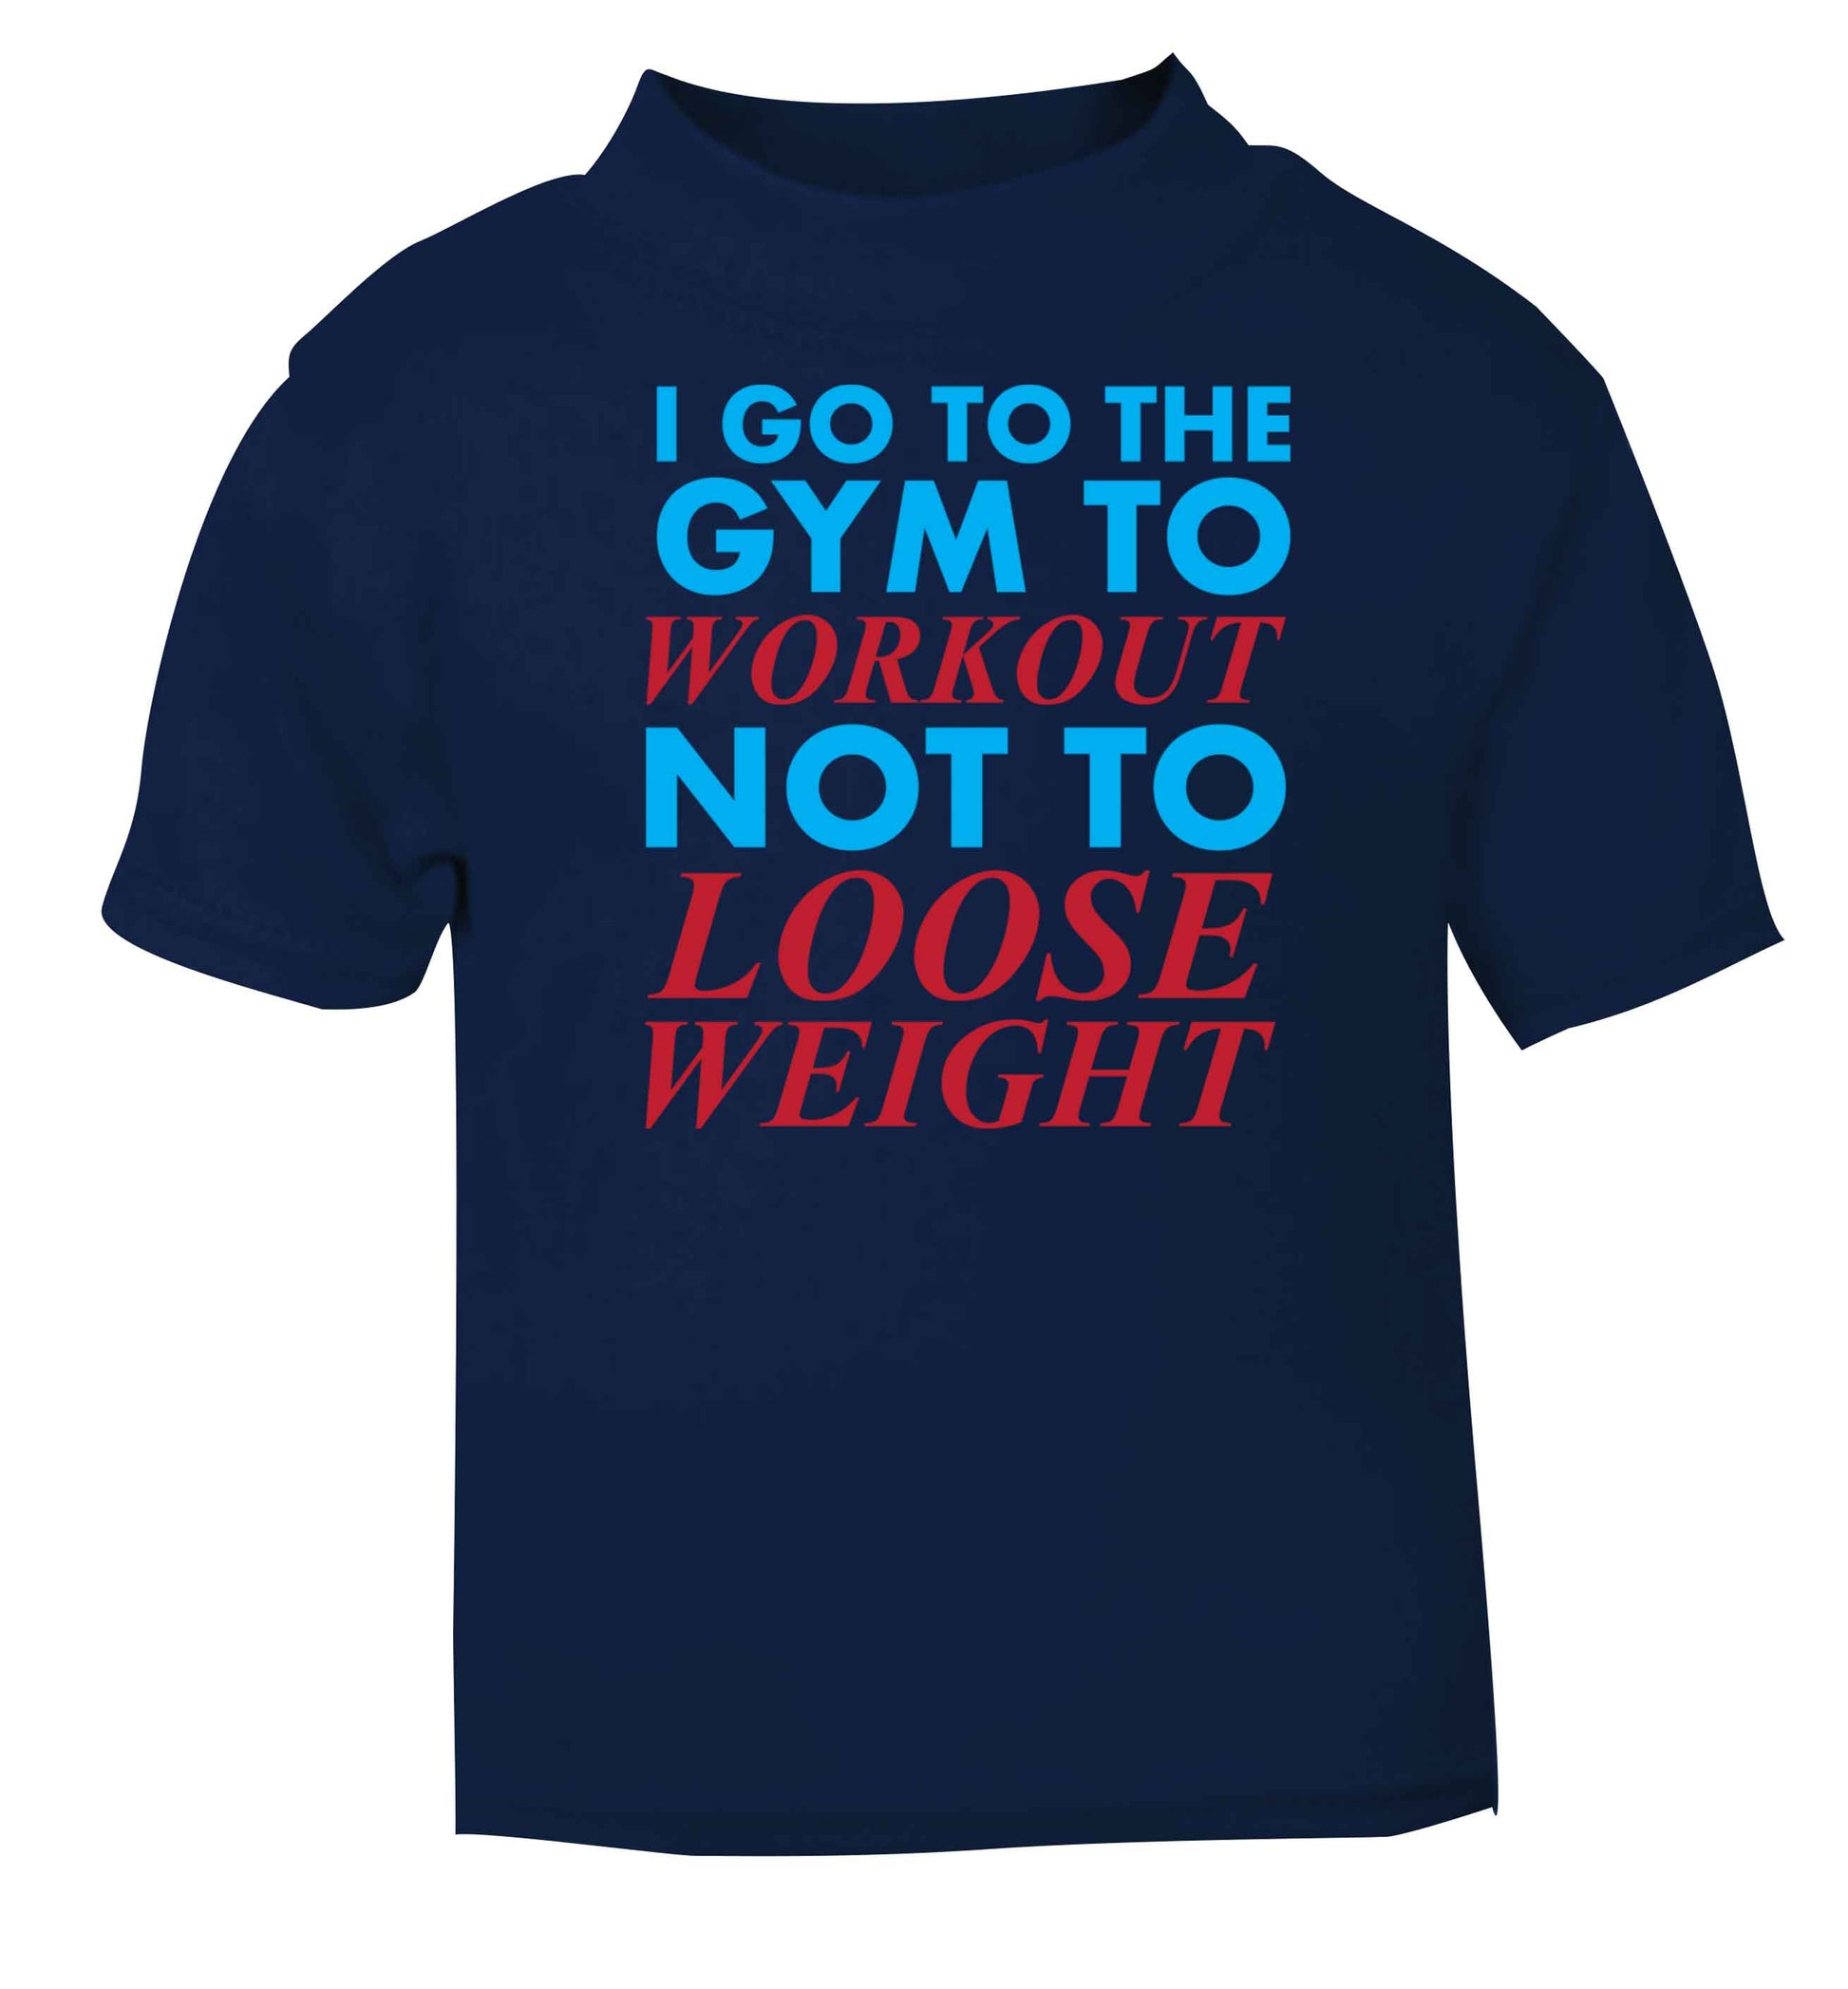 I go to the gym to workout not to loose weight navy baby toddler Tshirt 2 Years